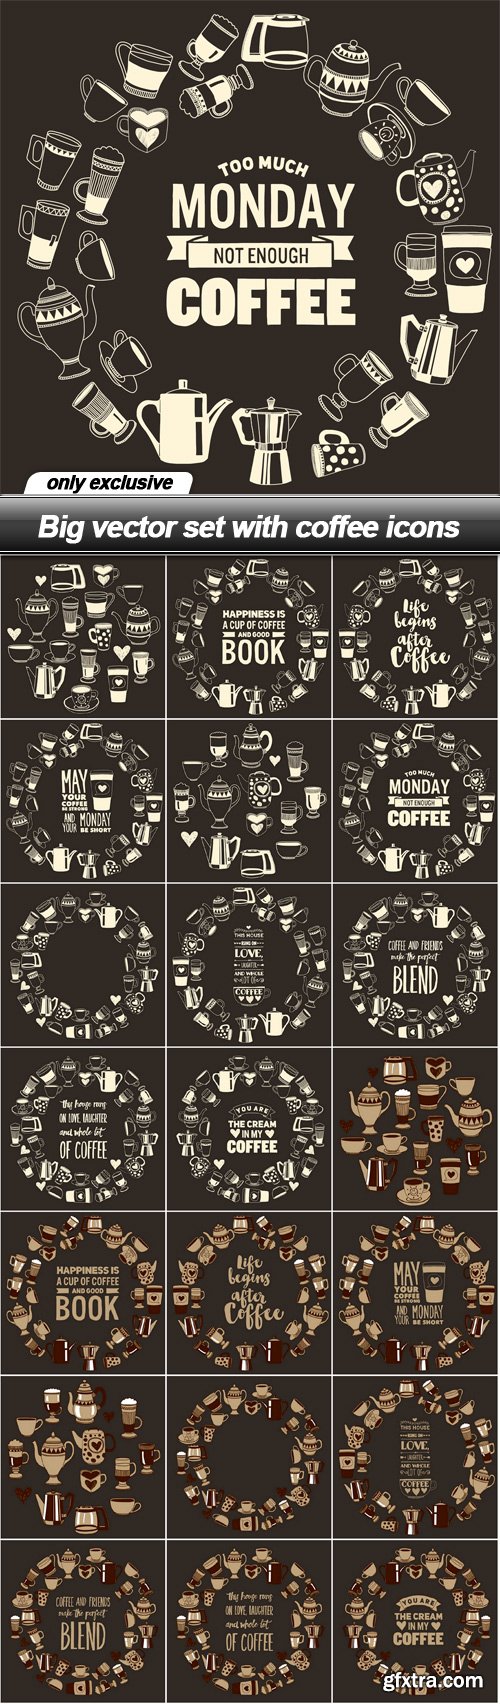 Big vector set with coffee icons - 22 EPS